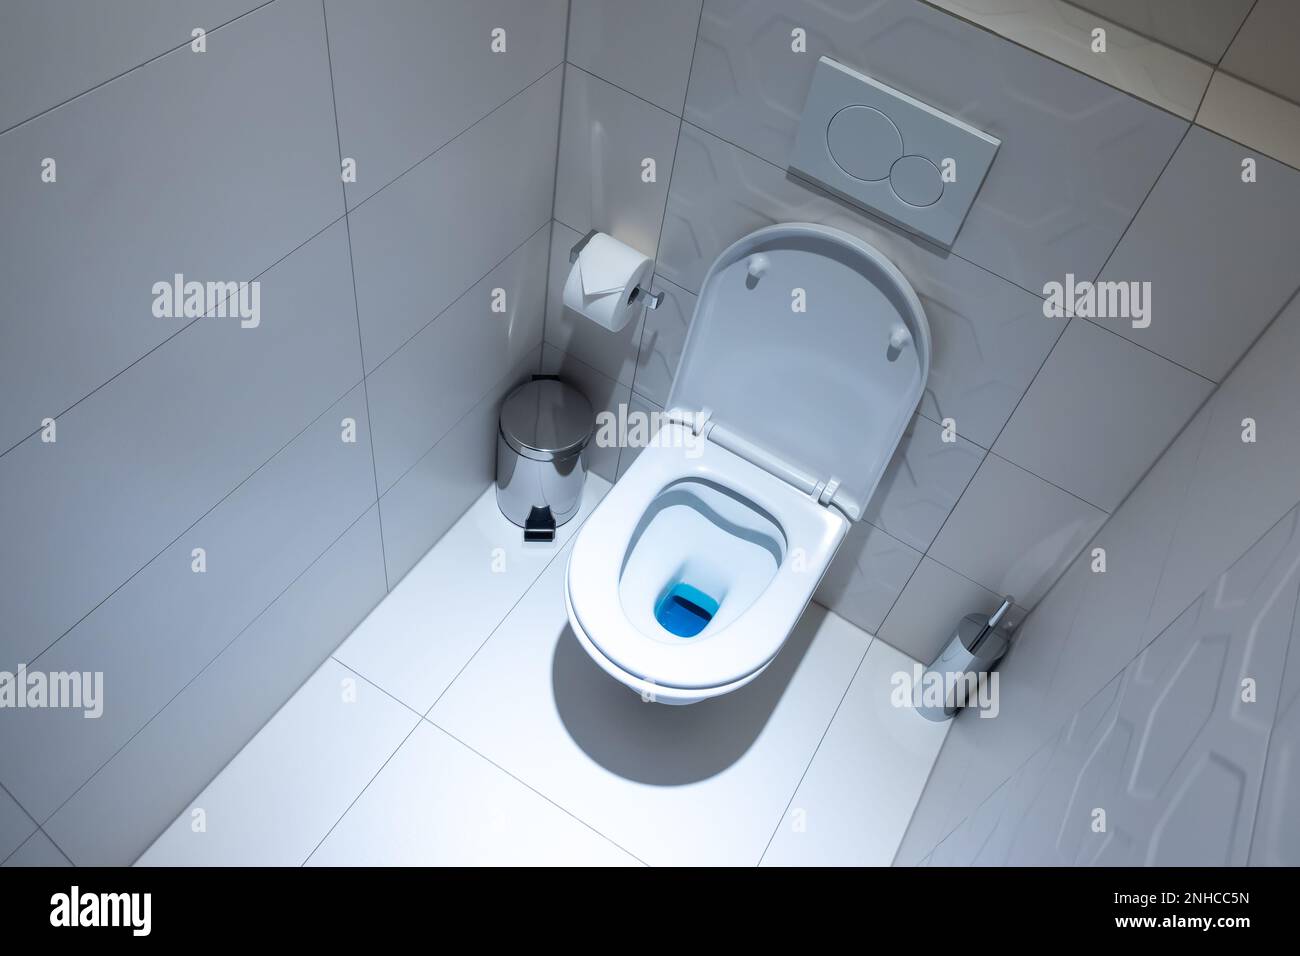 View of the white toilet bowl in the toilet. Bathroom finished with white glaze tiles and white terracotta. Trash can and brush in the background Stock Photo